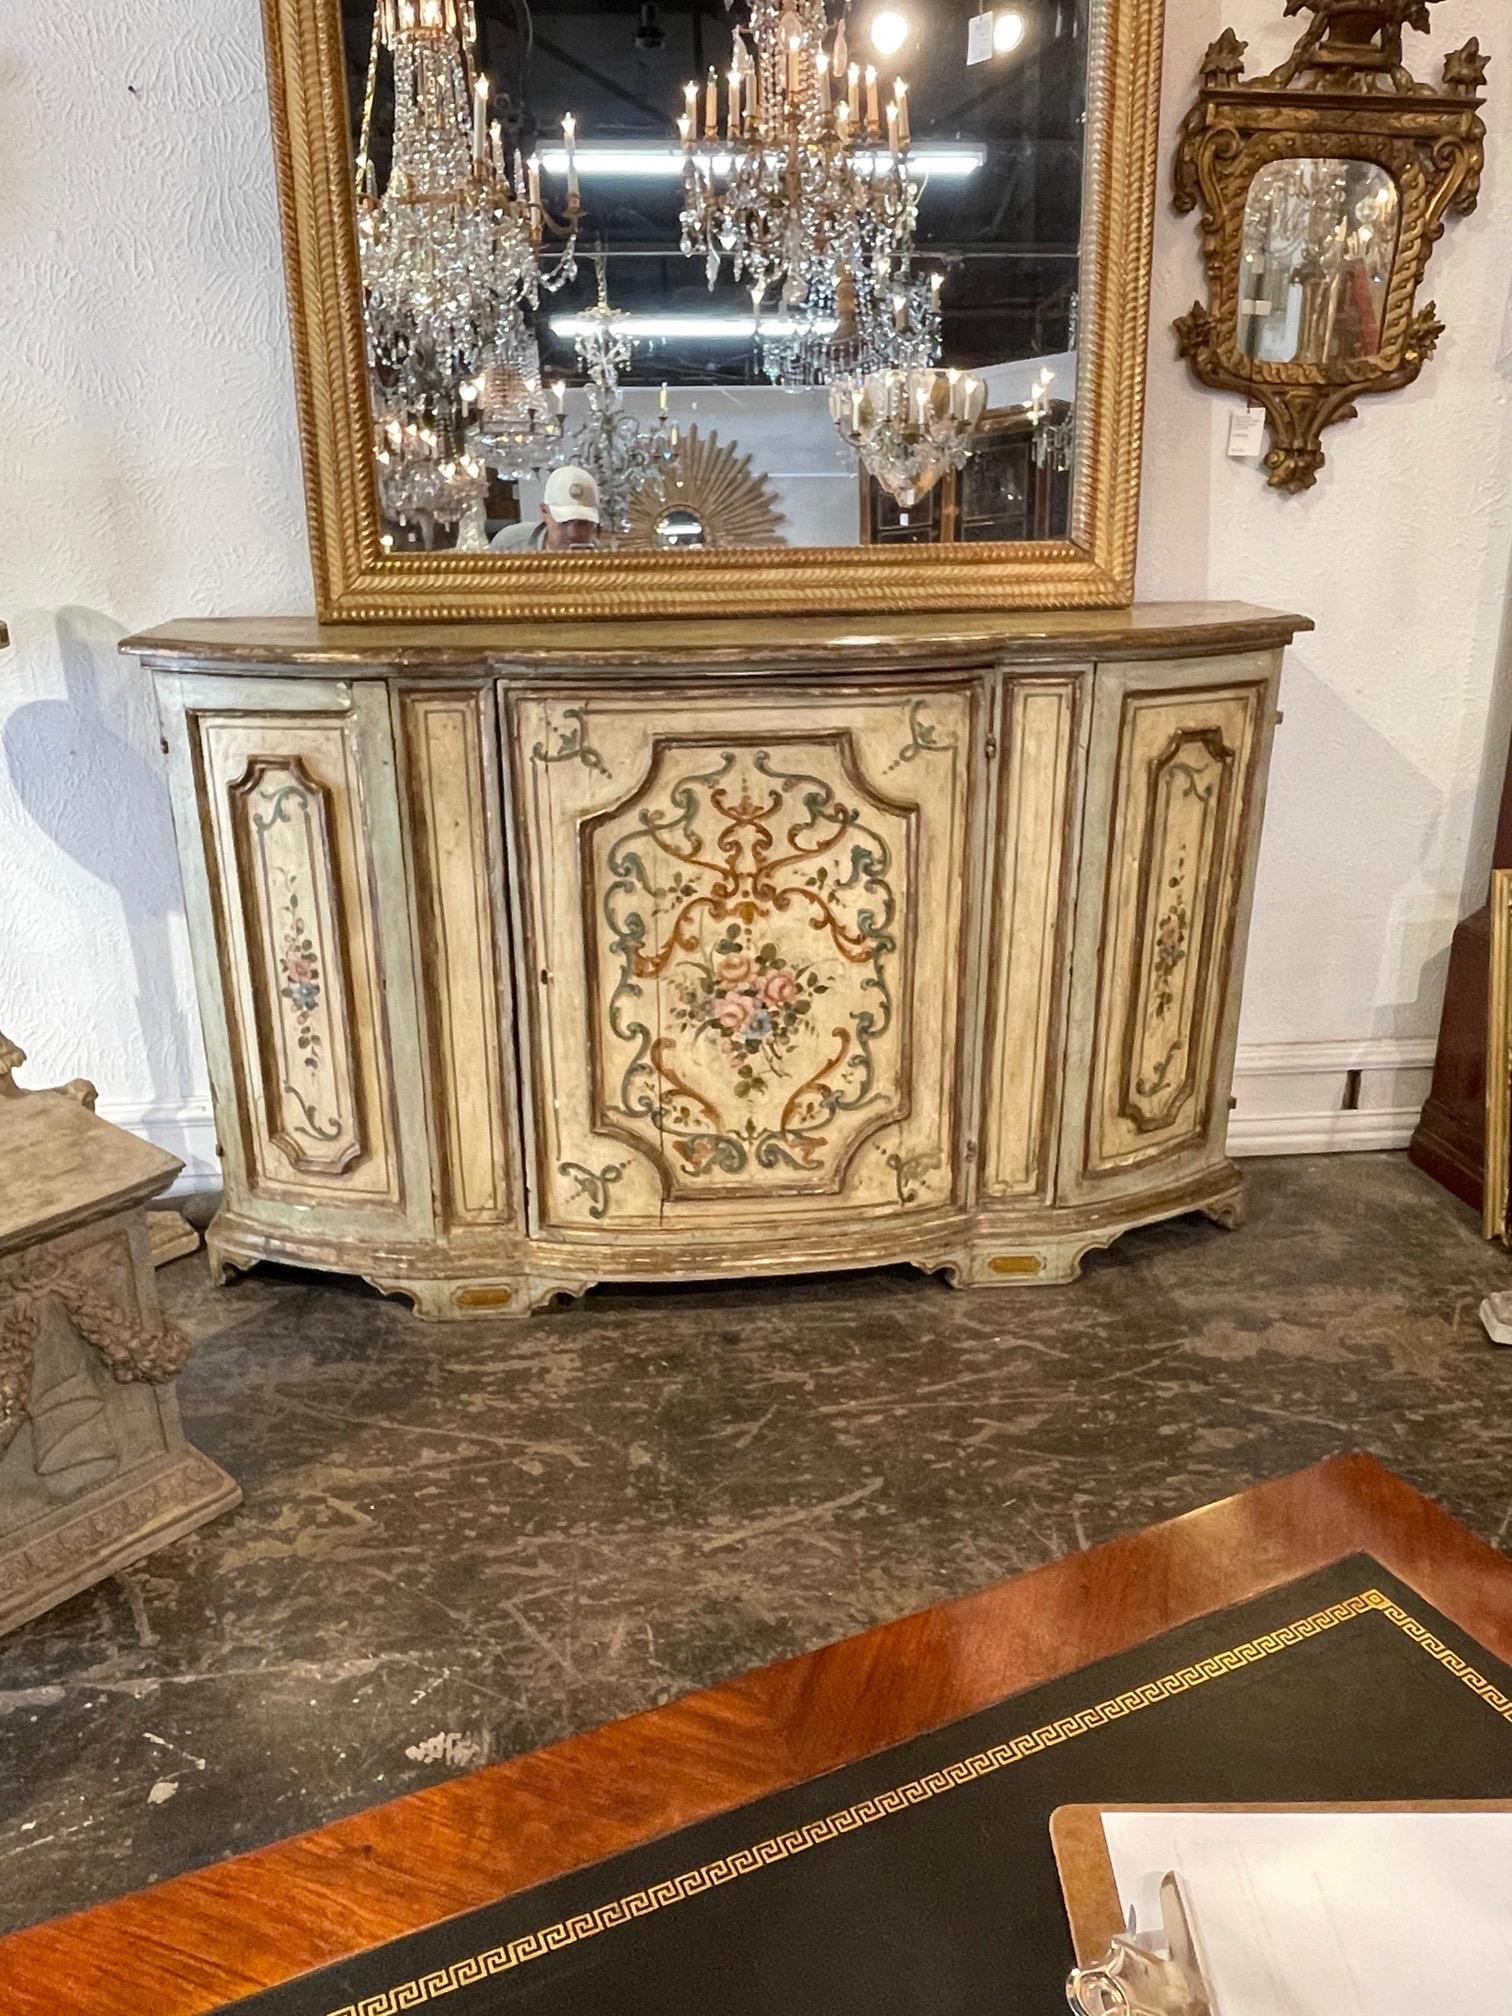 Gorgeous 18th century Italian painted commode. Beautiful painted floral pattern along with a fine patina. Pretty colors of pale green, crème, gold, pink and blue. A lovely decorative piece!